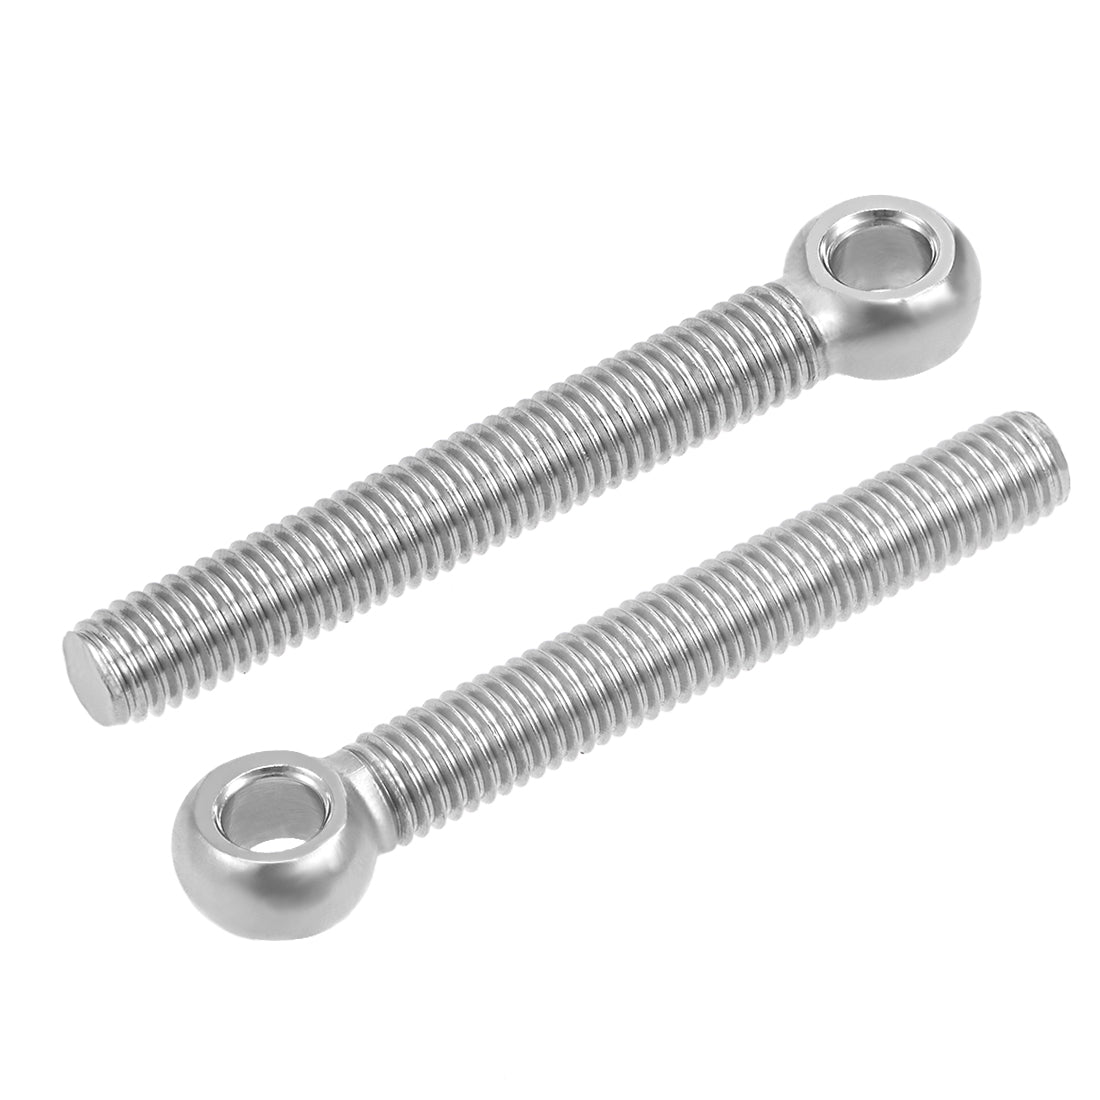 Uxcell Uxcell M5 x 25mm 304 Stainless Steel Machine Shoulder Lift Eye Bolt Rigging 4pcs